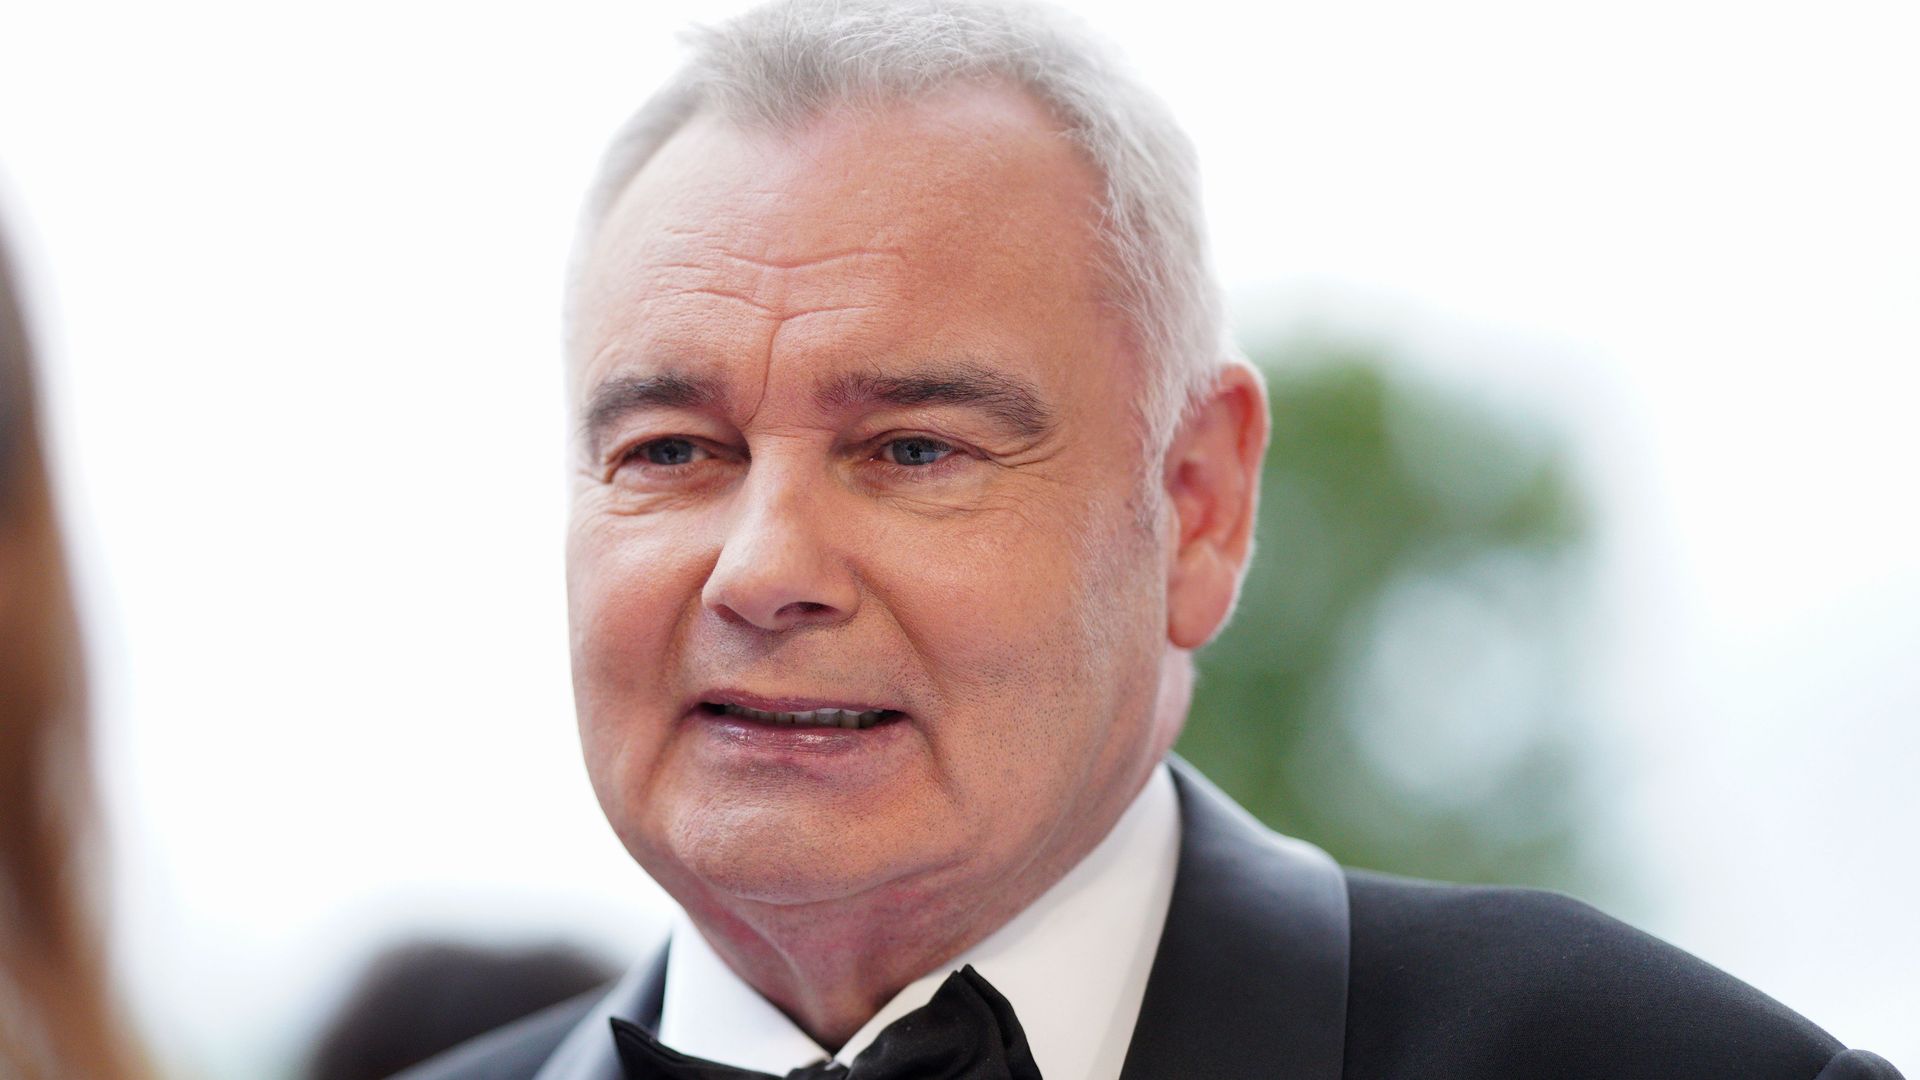 Eamonn Holmes looking serious in a bowtie